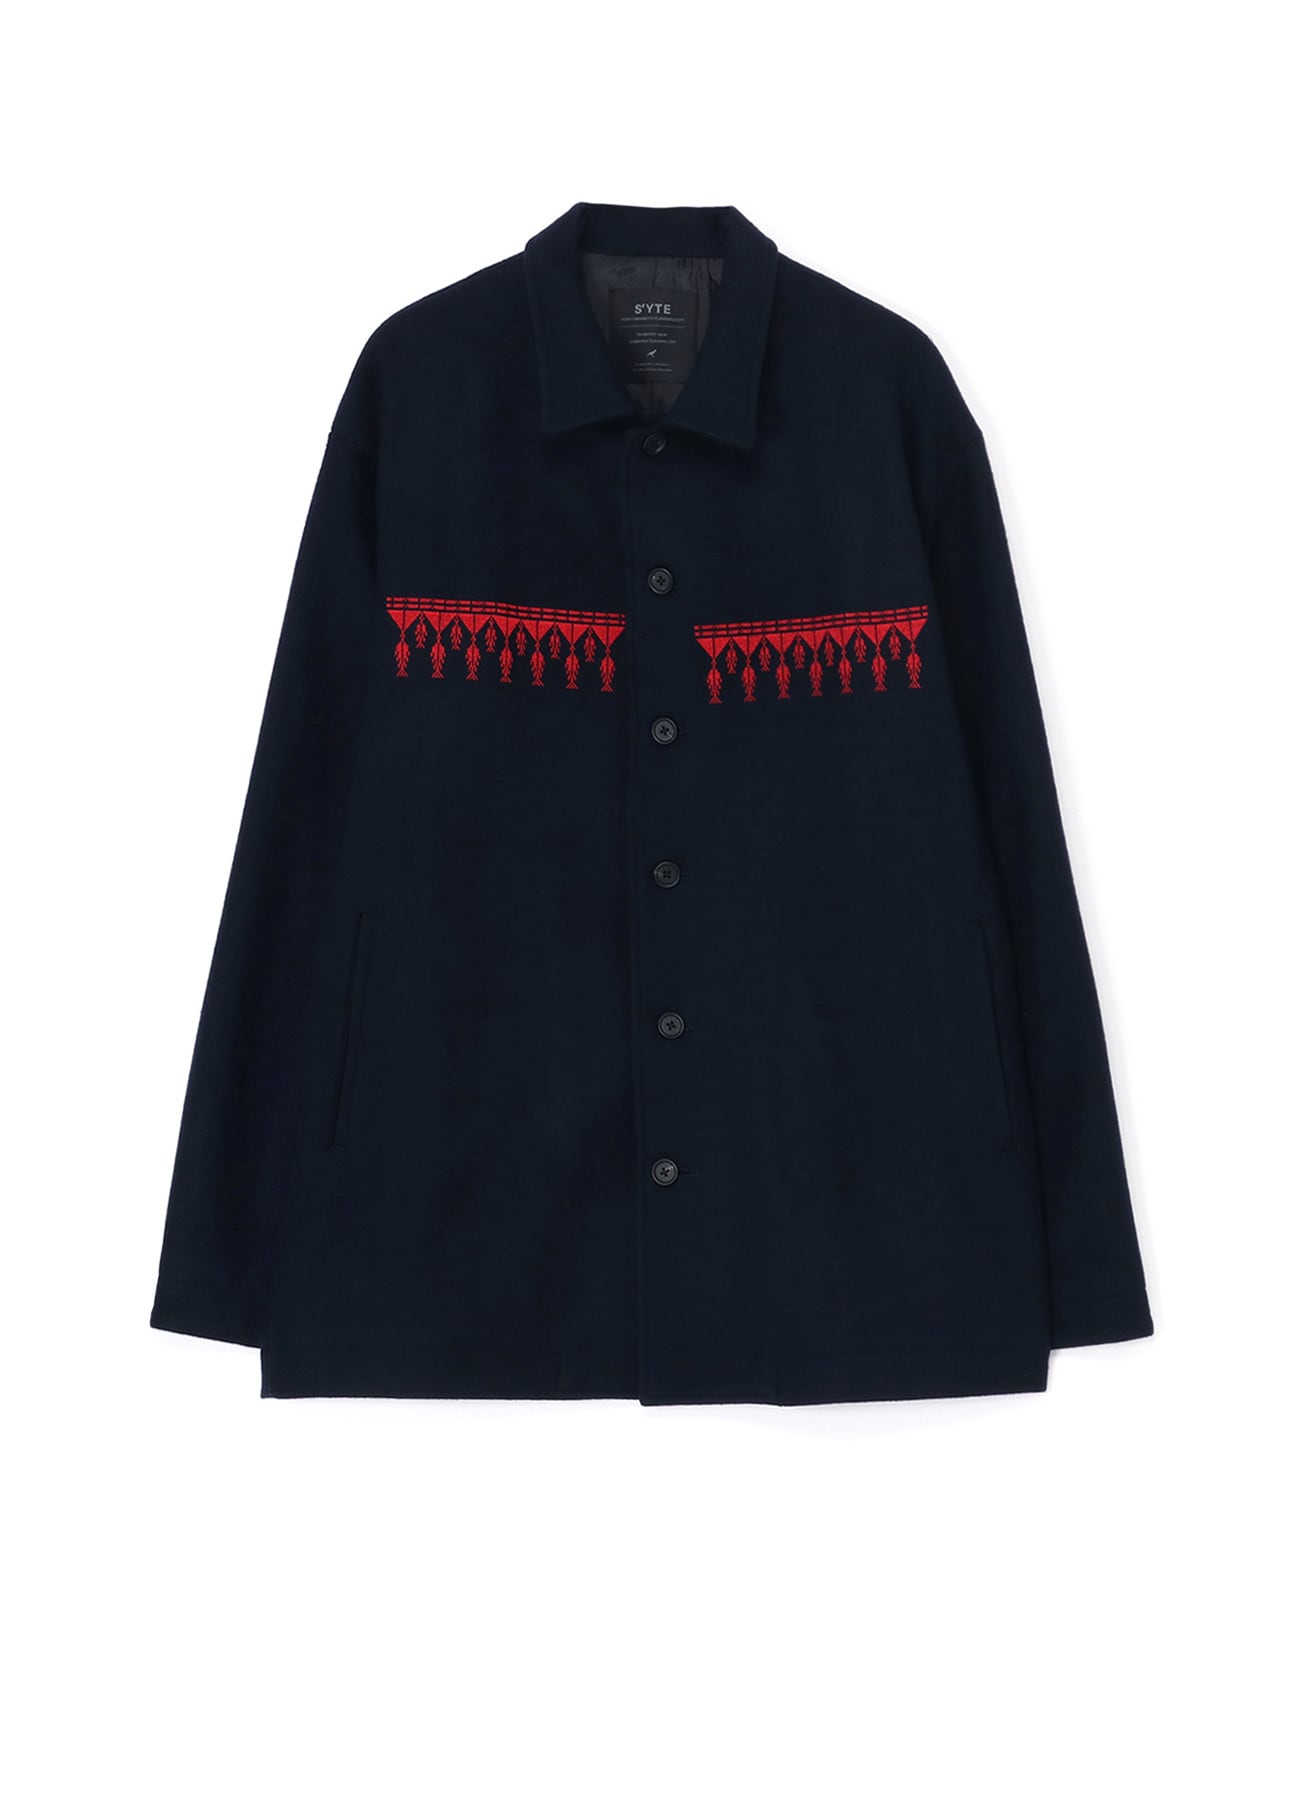 COMPRESSED JERSEY ETHNIC EMBROIDERED BLOUSON